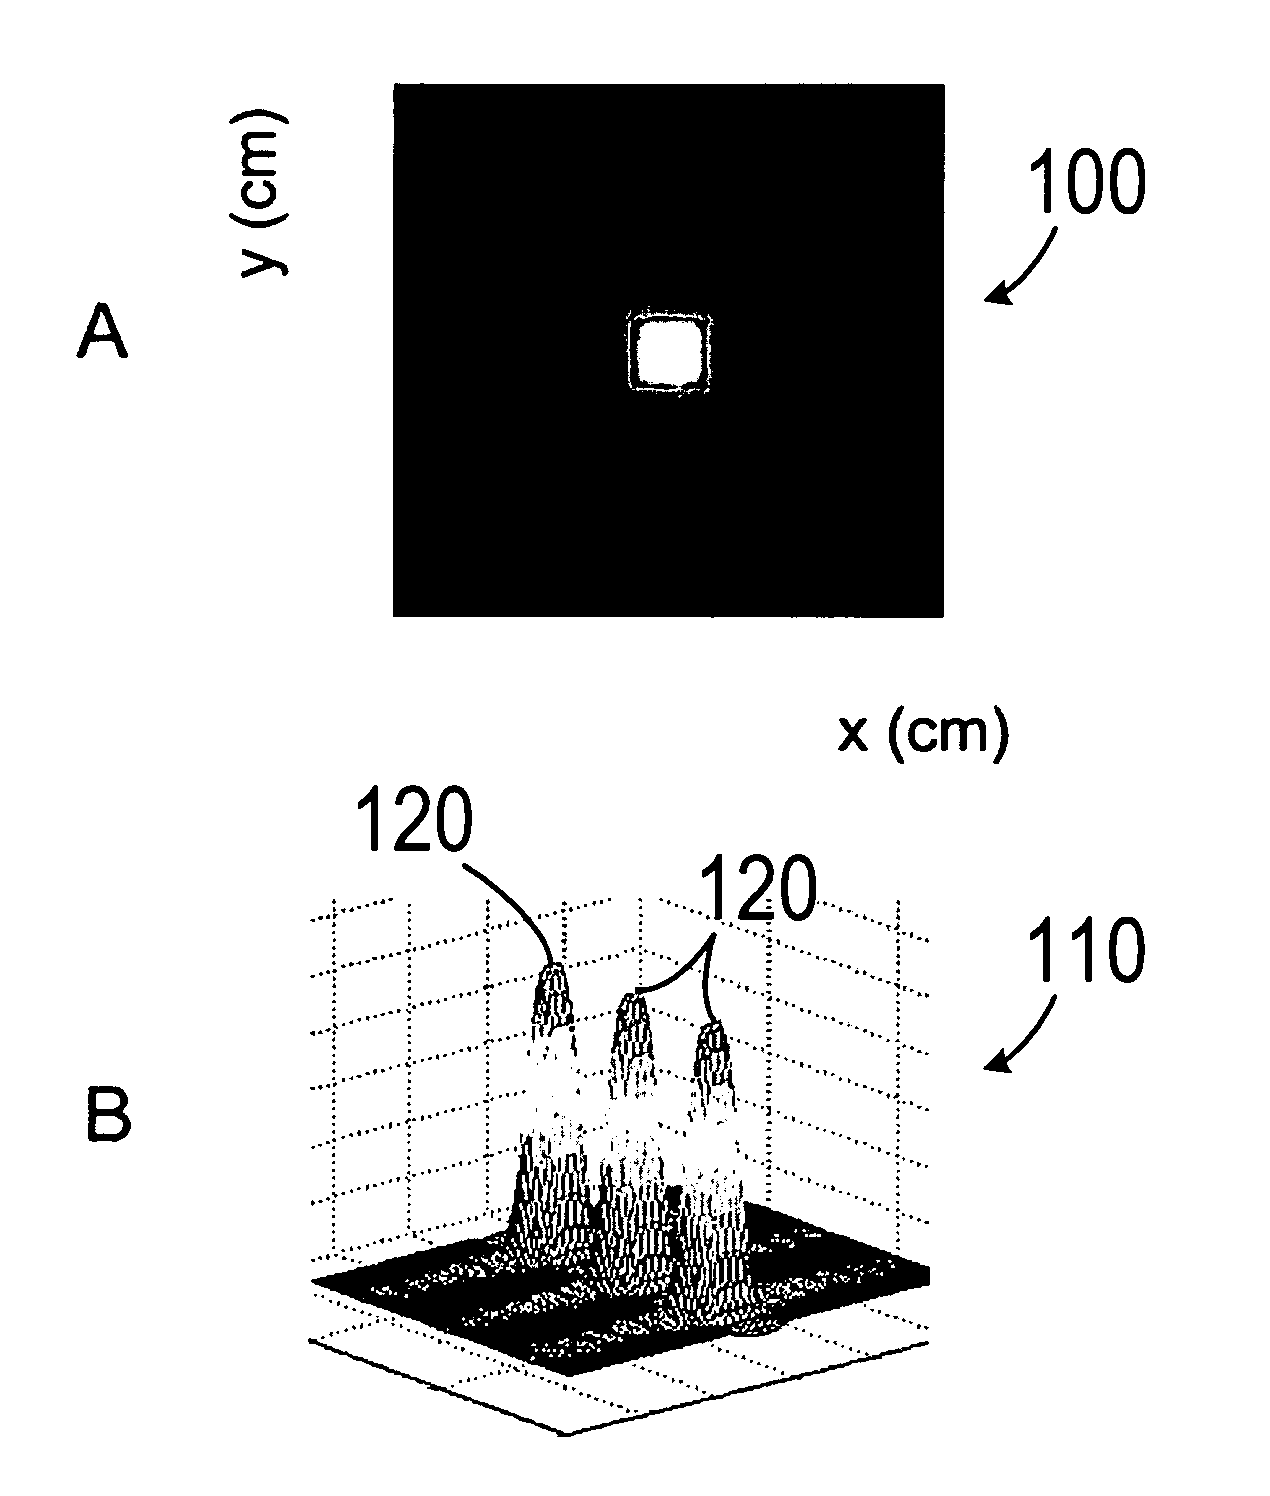 System and method for accelerated MR imaging